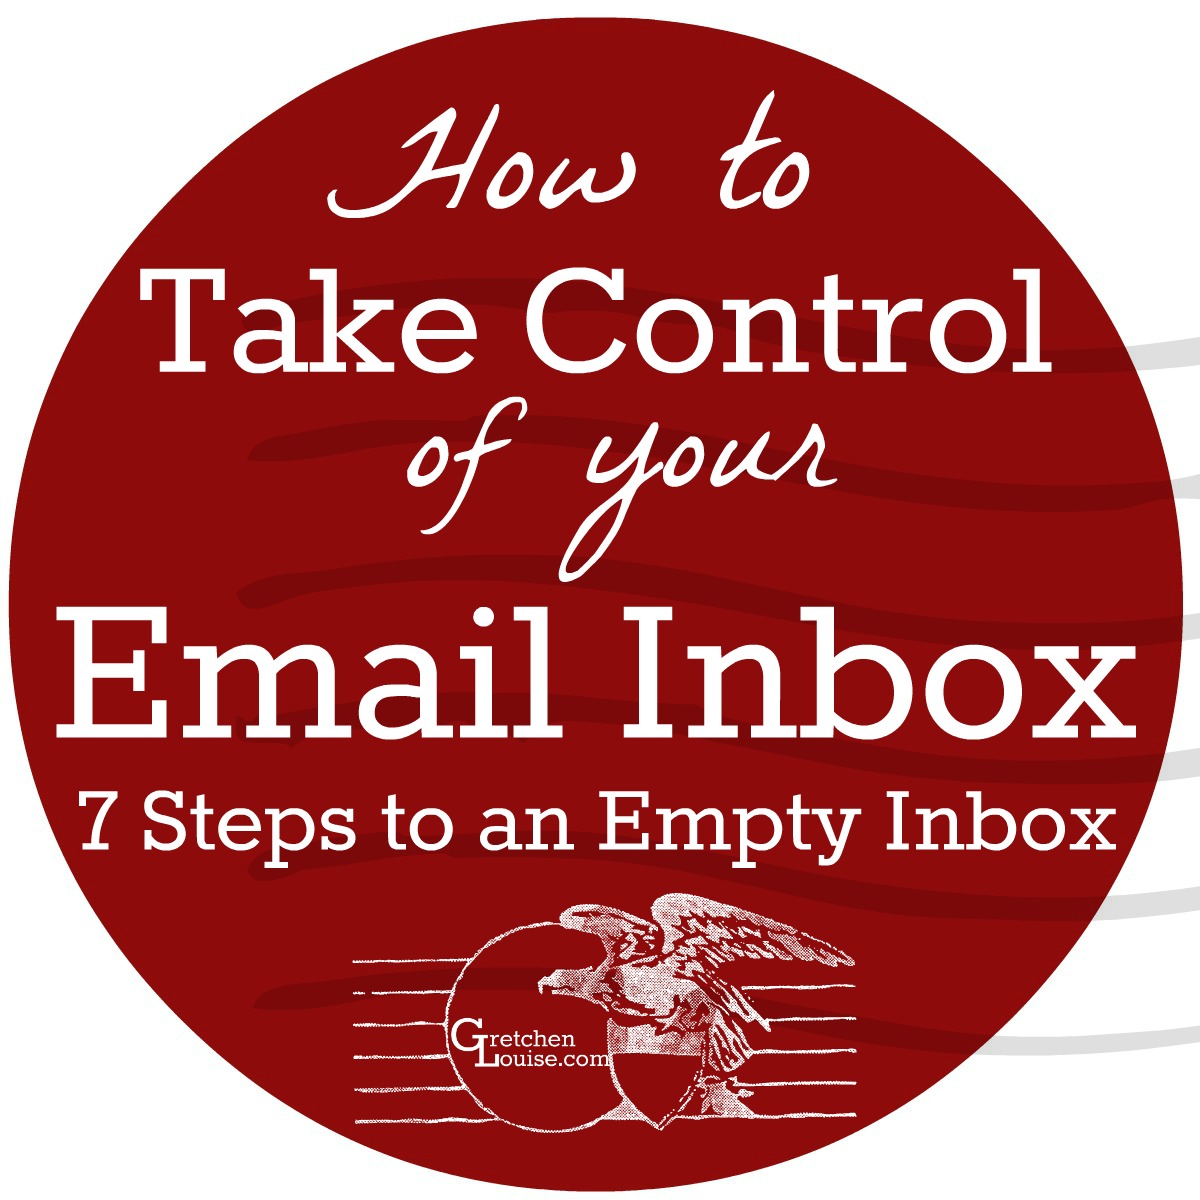 How to Take Control of Your Email Inbox